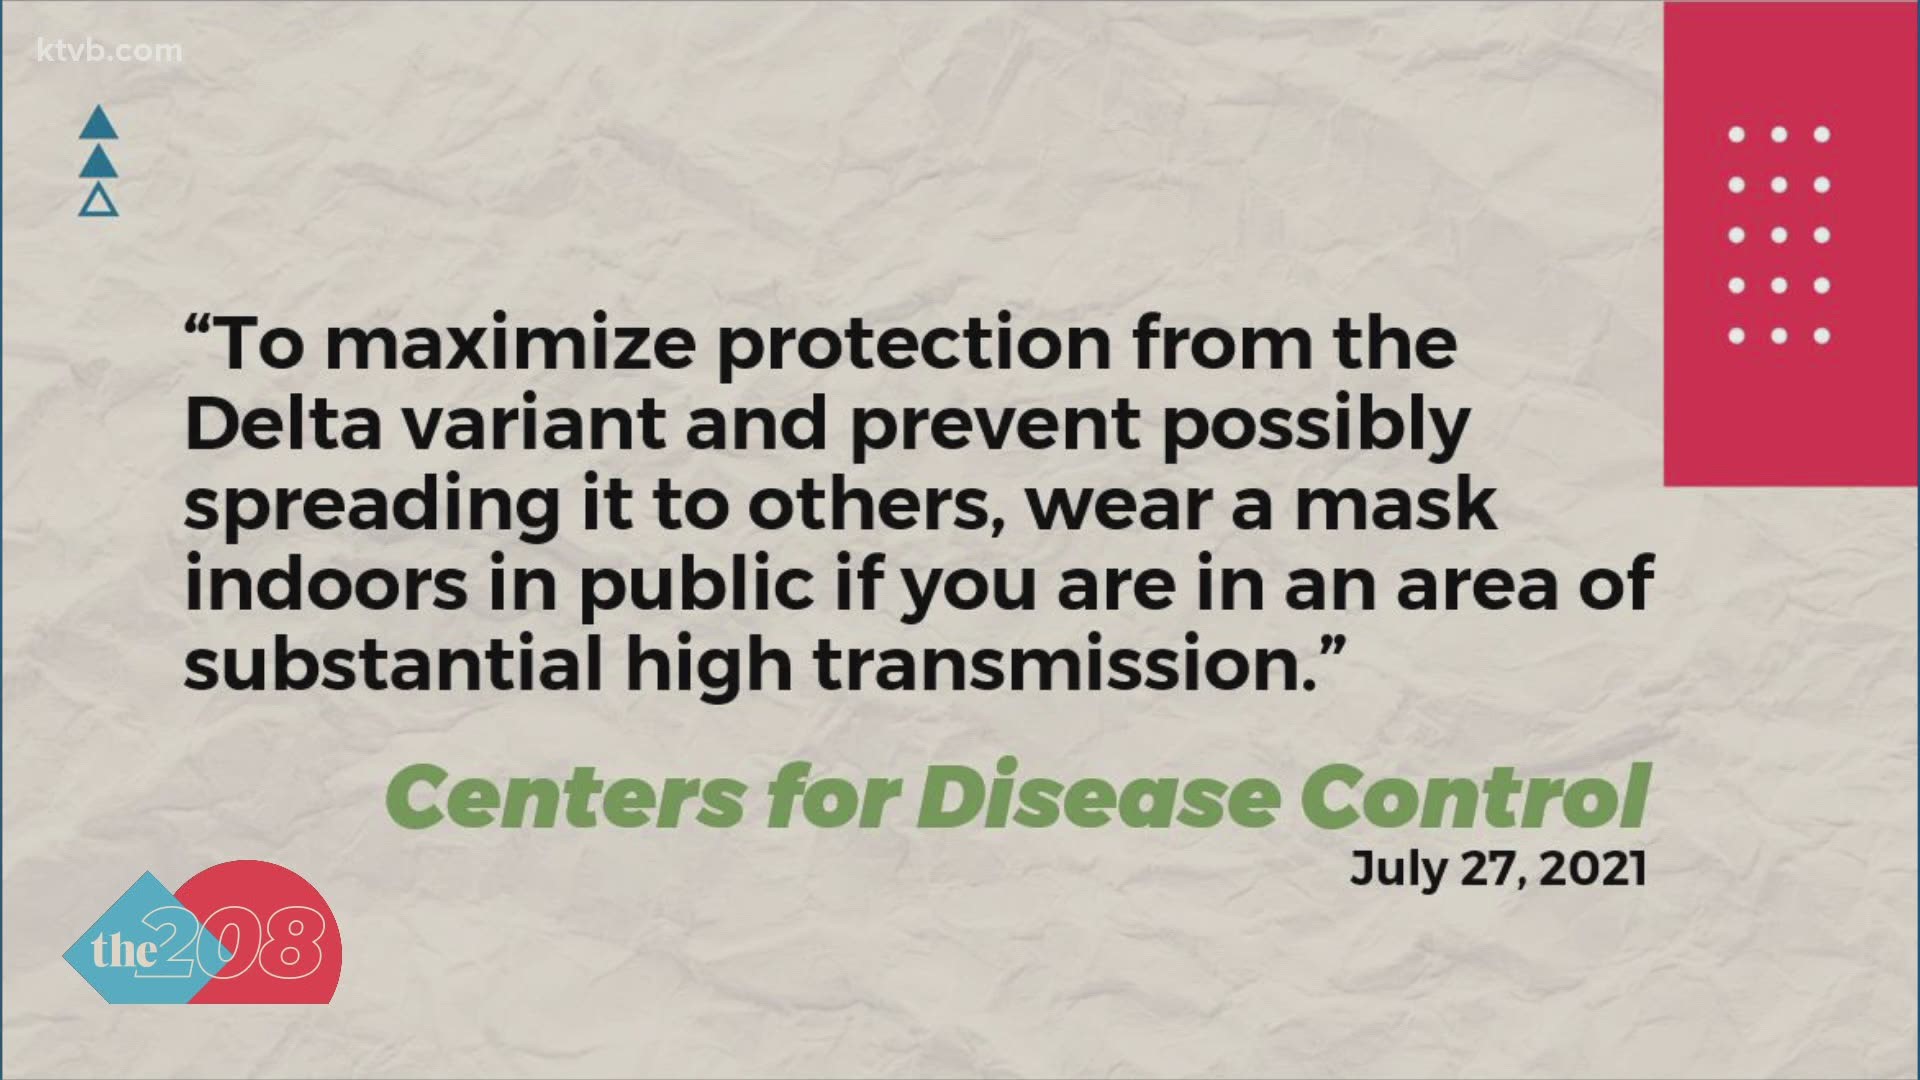 The mask requirement goes into effect on Wednesday, July 28.